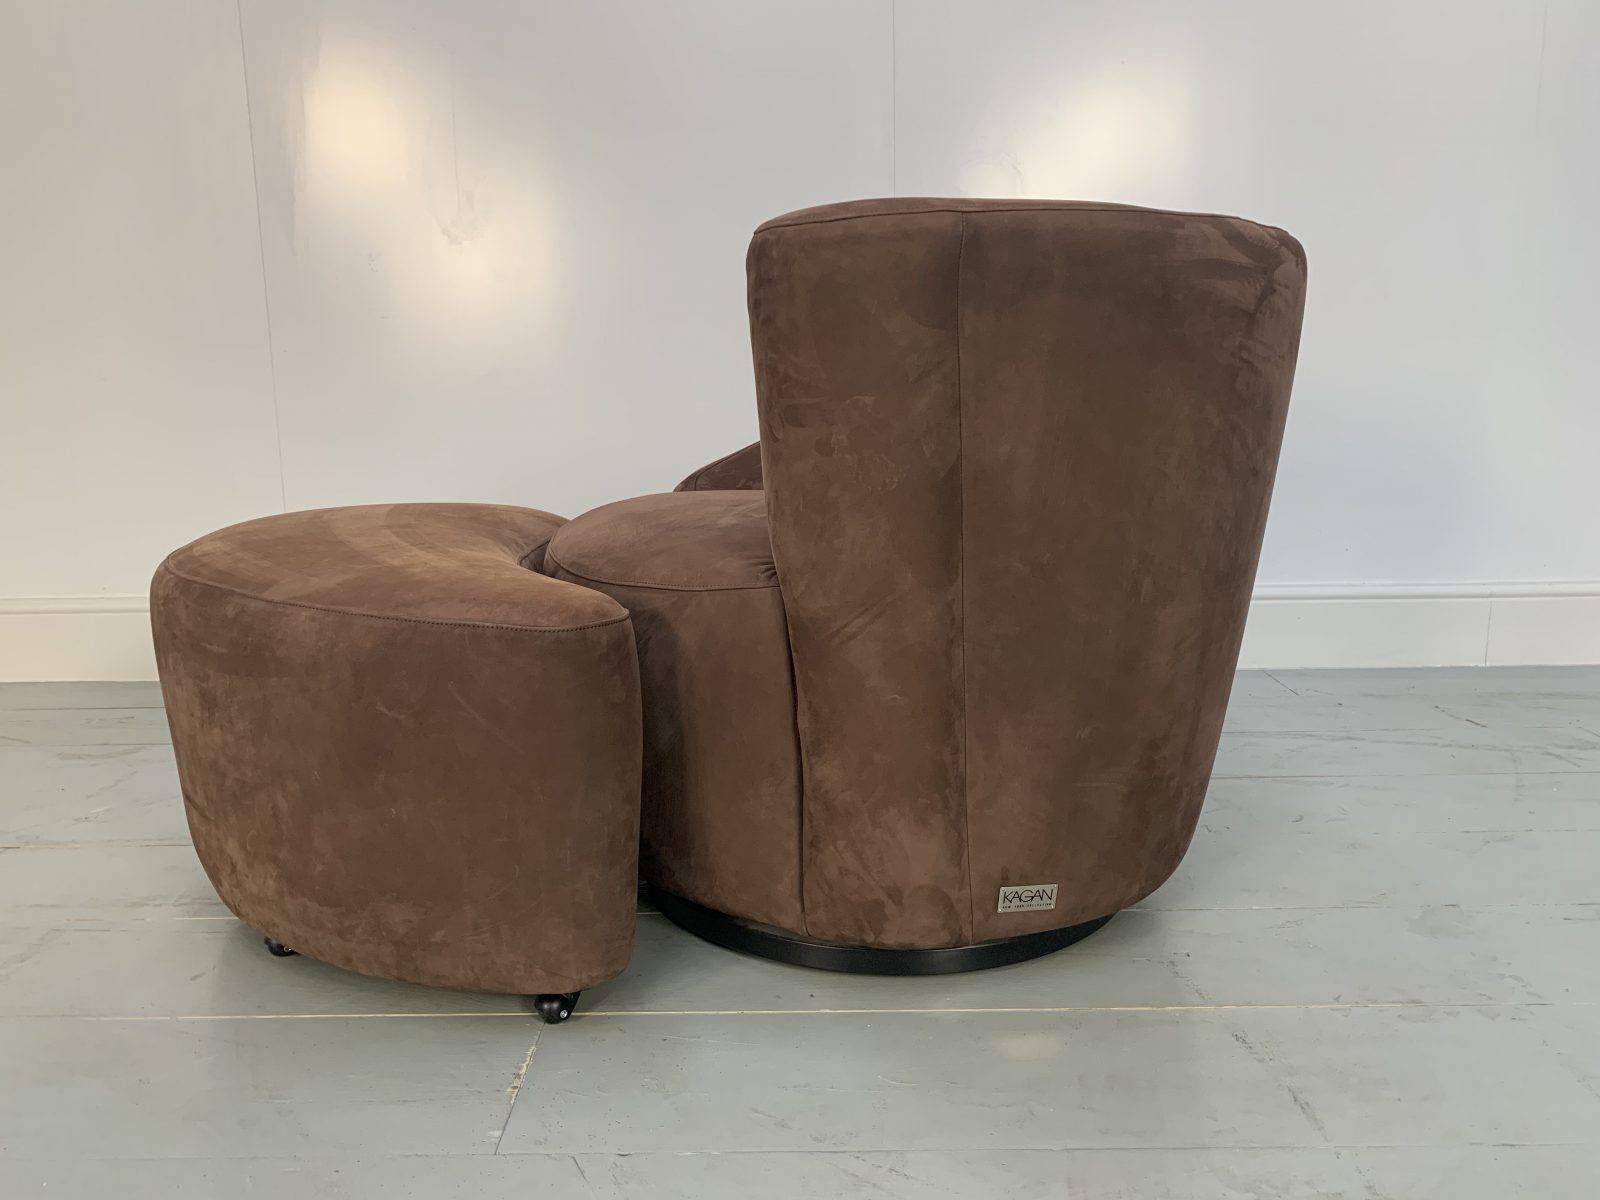 Contemporary Superb Vladimir Kagan “Nautilus” Corkscrew Armchair and Footstool in Brown Ultra For Sale